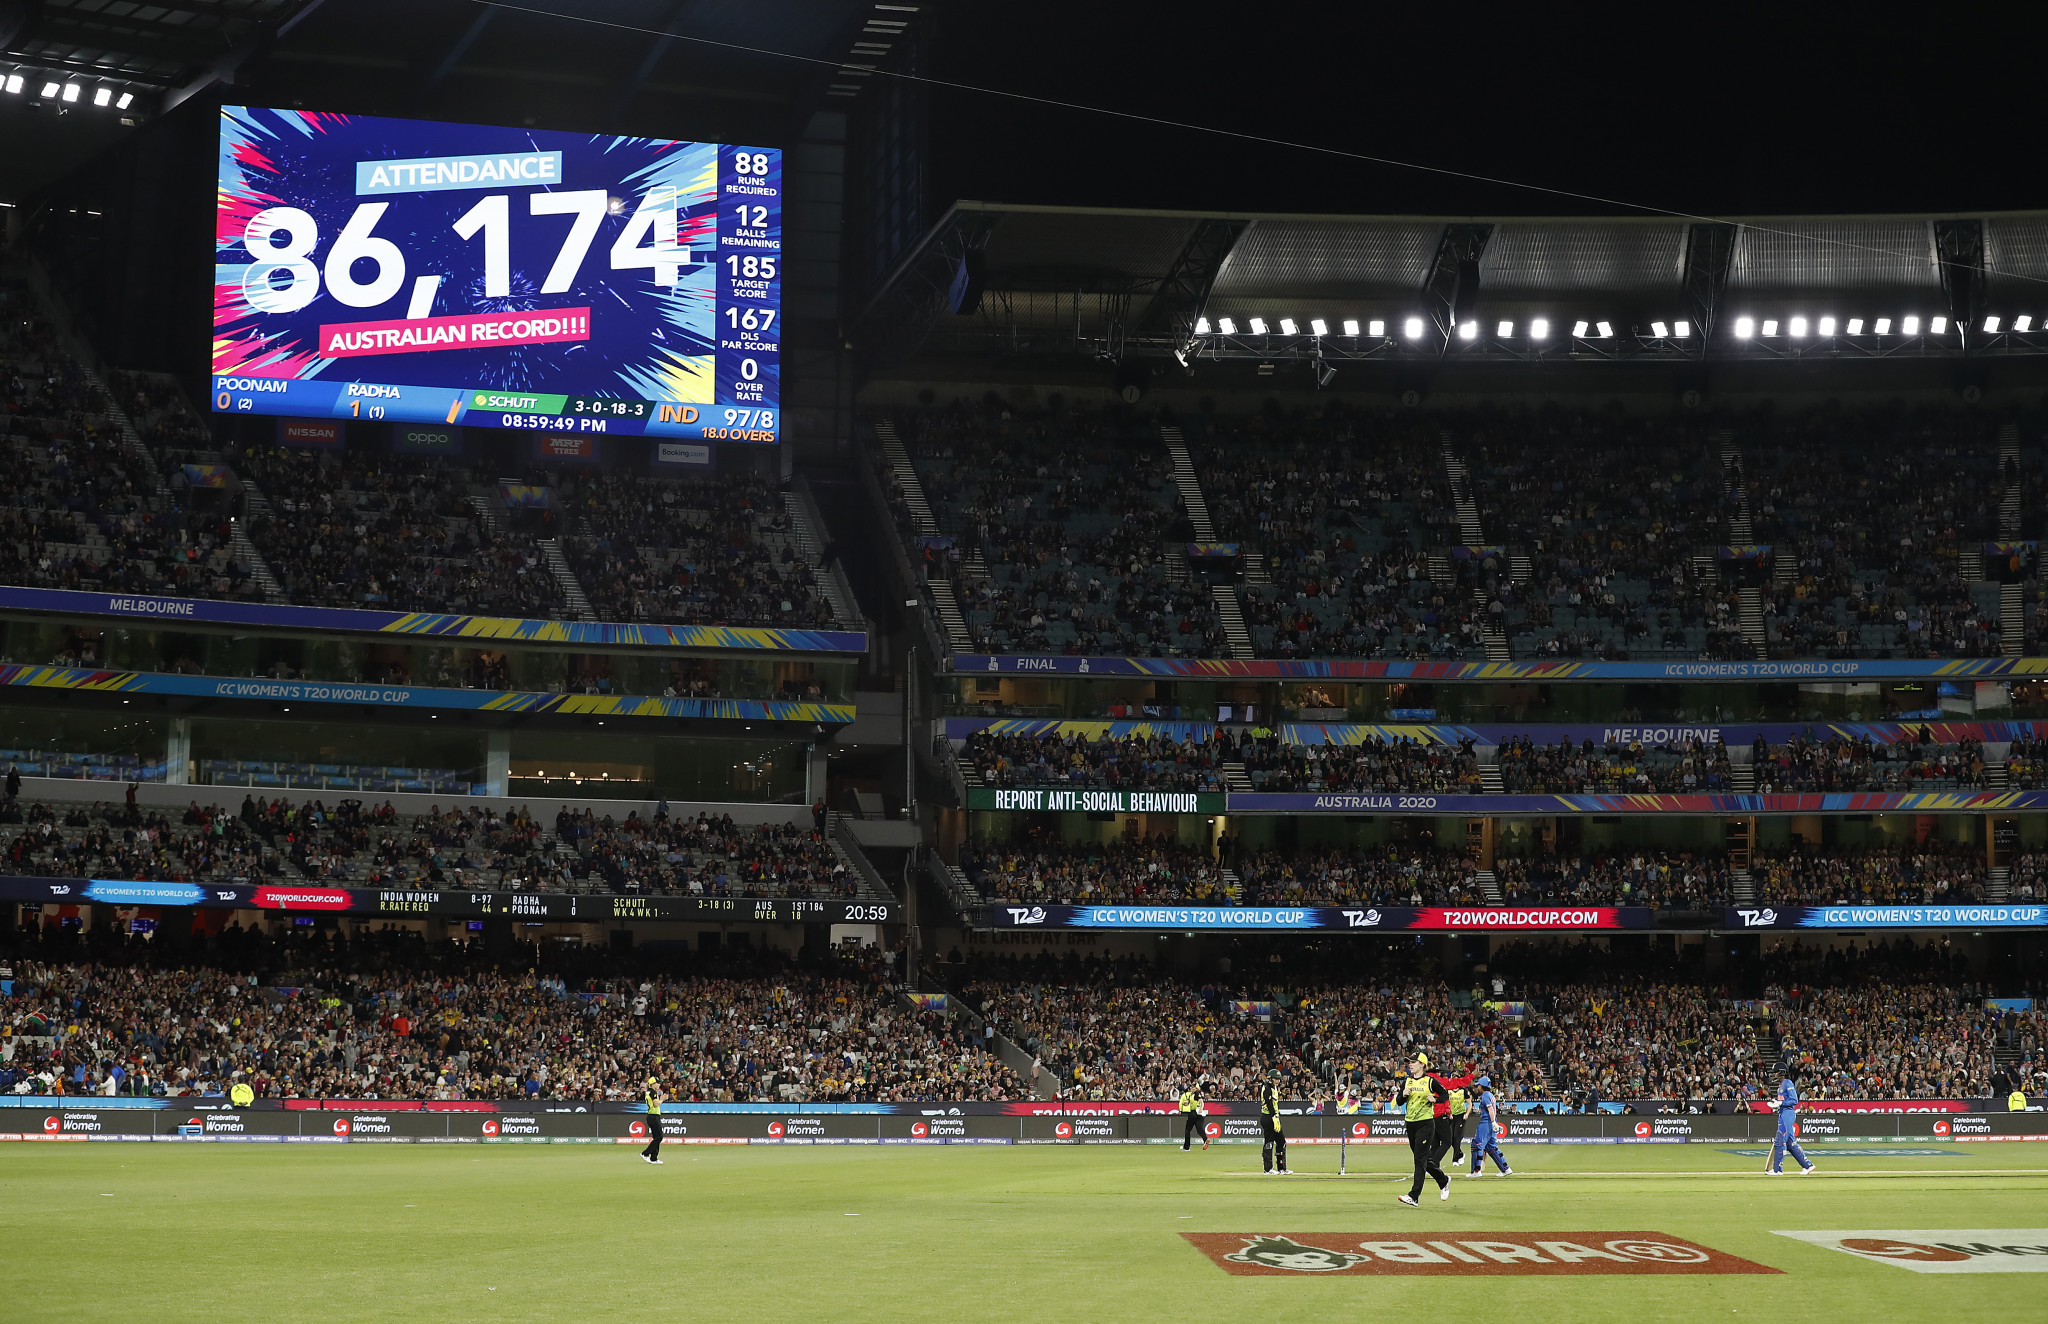 The Women's T20 World Cup final was held in front of 86,174 spectators at Melbourne Cricket Ground ©Getty Images